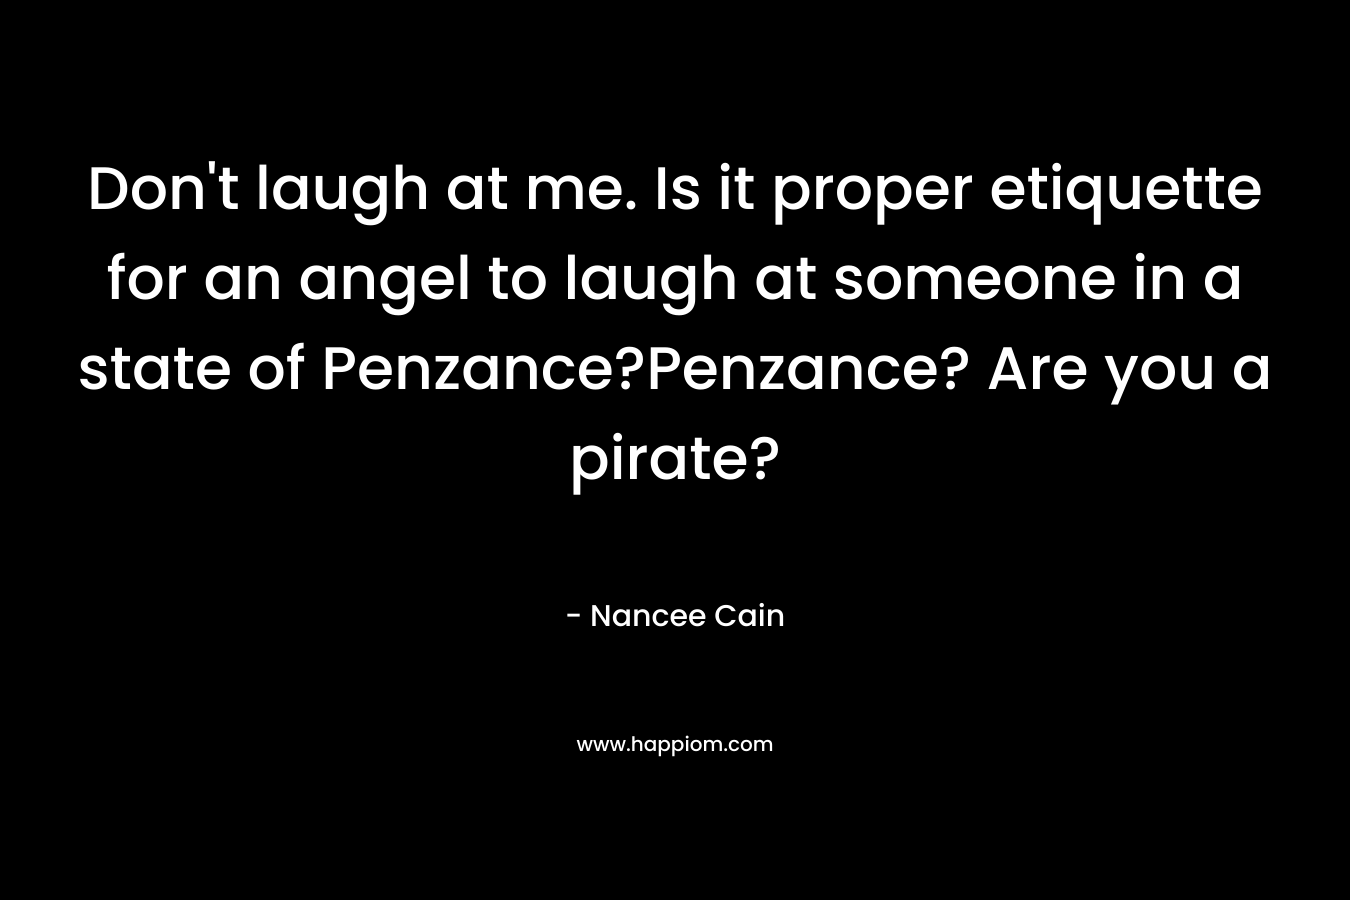 Don’t laugh at me. Is it proper etiquette for an angel to laugh at someone in a state of Penzance?Penzance? Are you a pirate? – Nancee Cain